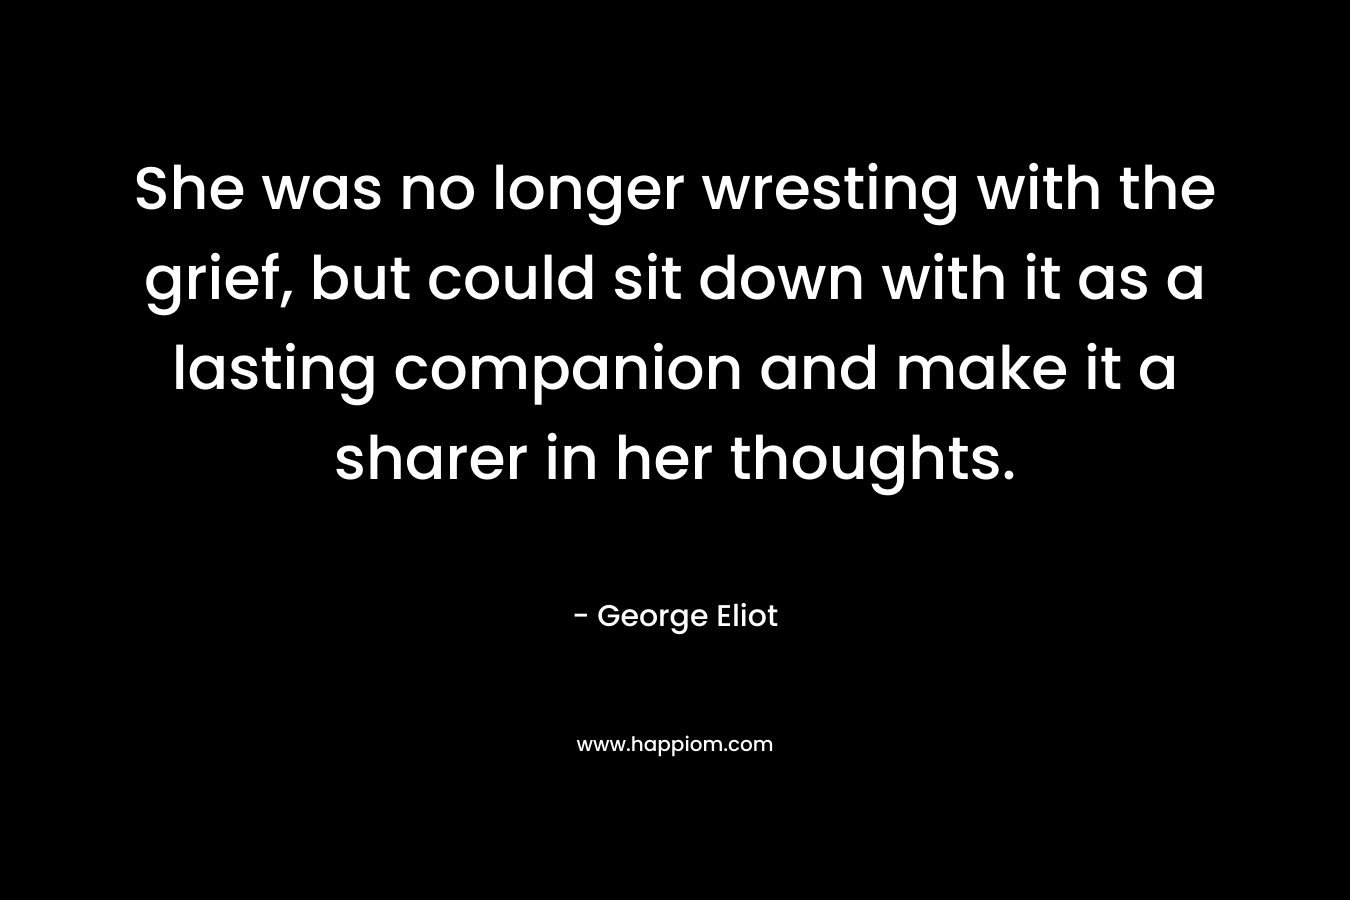 She was no longer wresting with the grief, but could sit down with it as a lasting companion and make it a sharer in her thoughts. – George Eliot